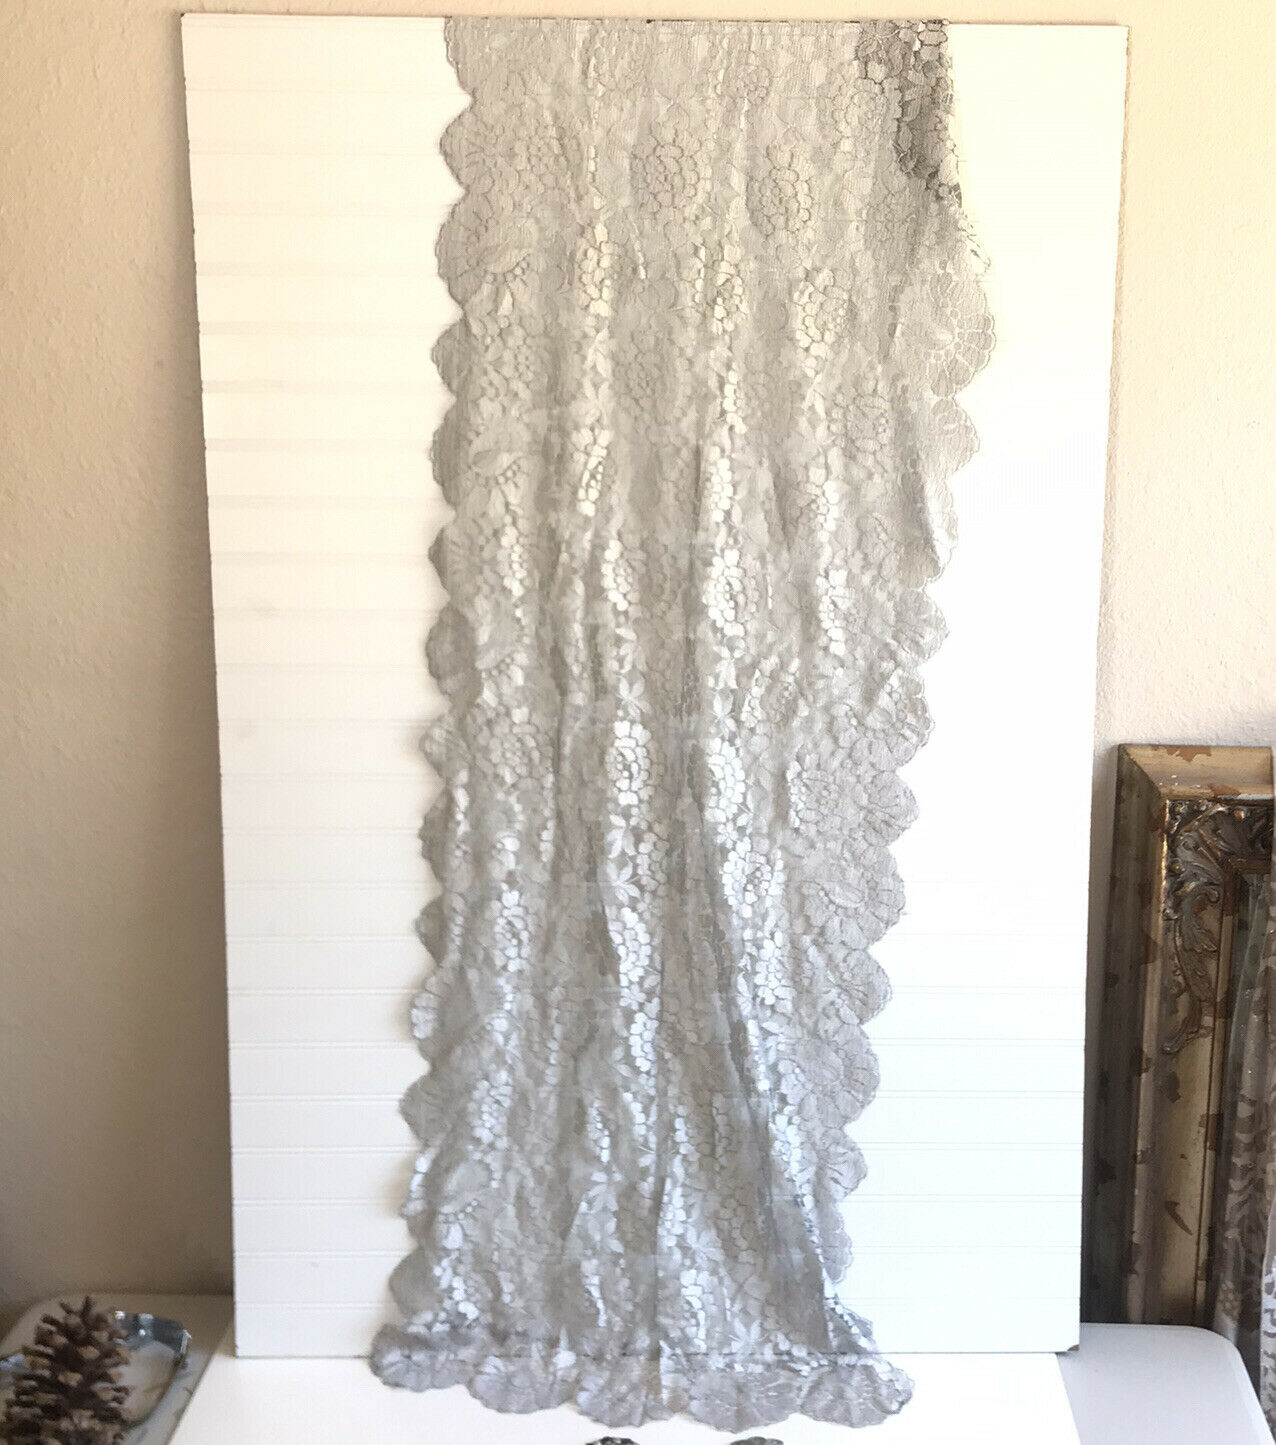 Vintage Scalloped Fine Lace Table Runner Scarf 58 X 19” Gray Floral Flowers Good